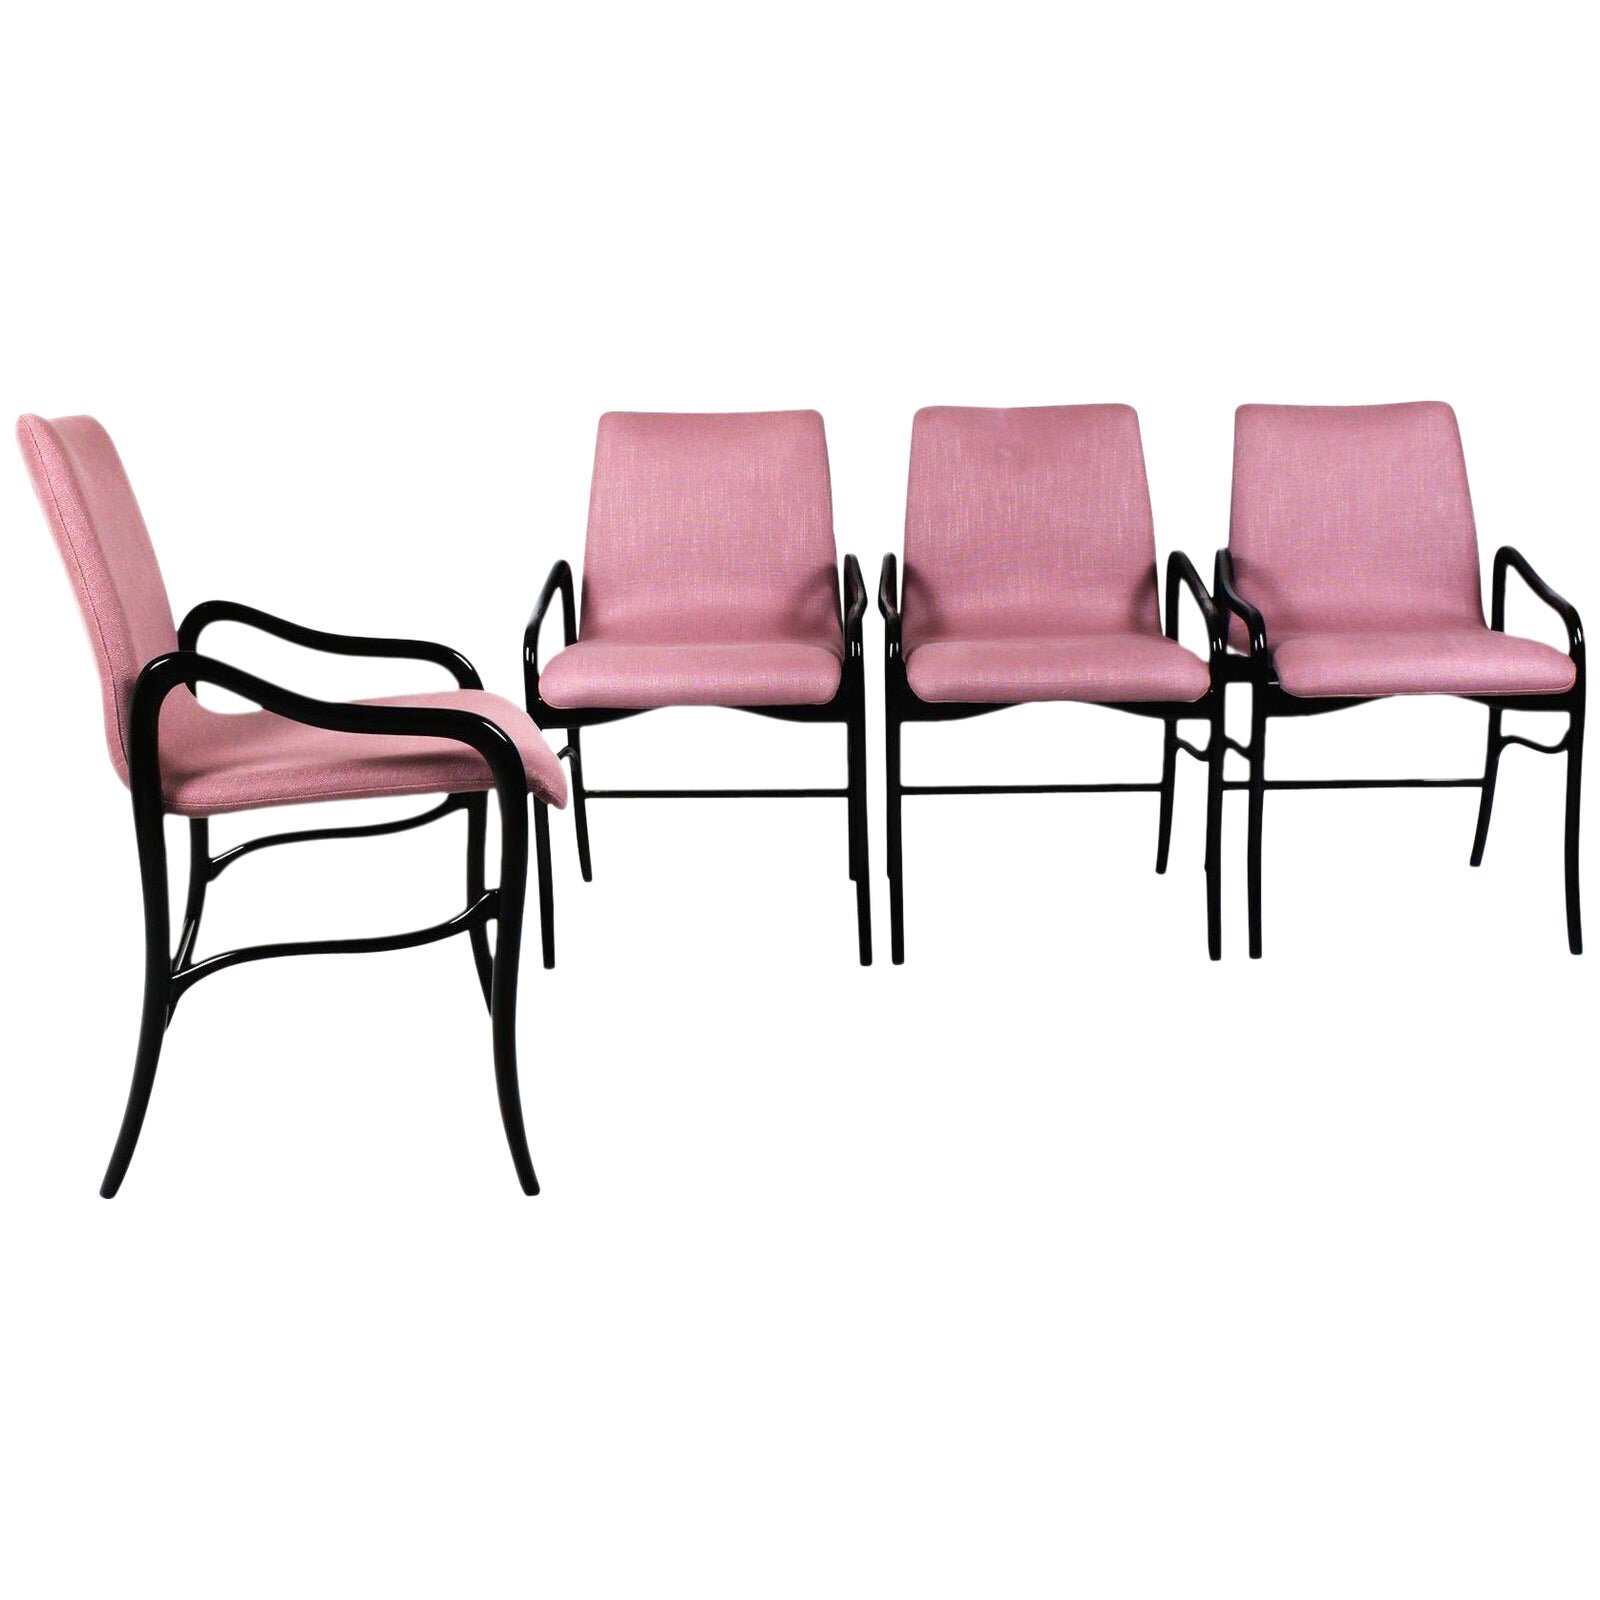 1960s Set of Four Armchairs by Enrico Ciuti, Rounded Beech, Pink Linen - Italy